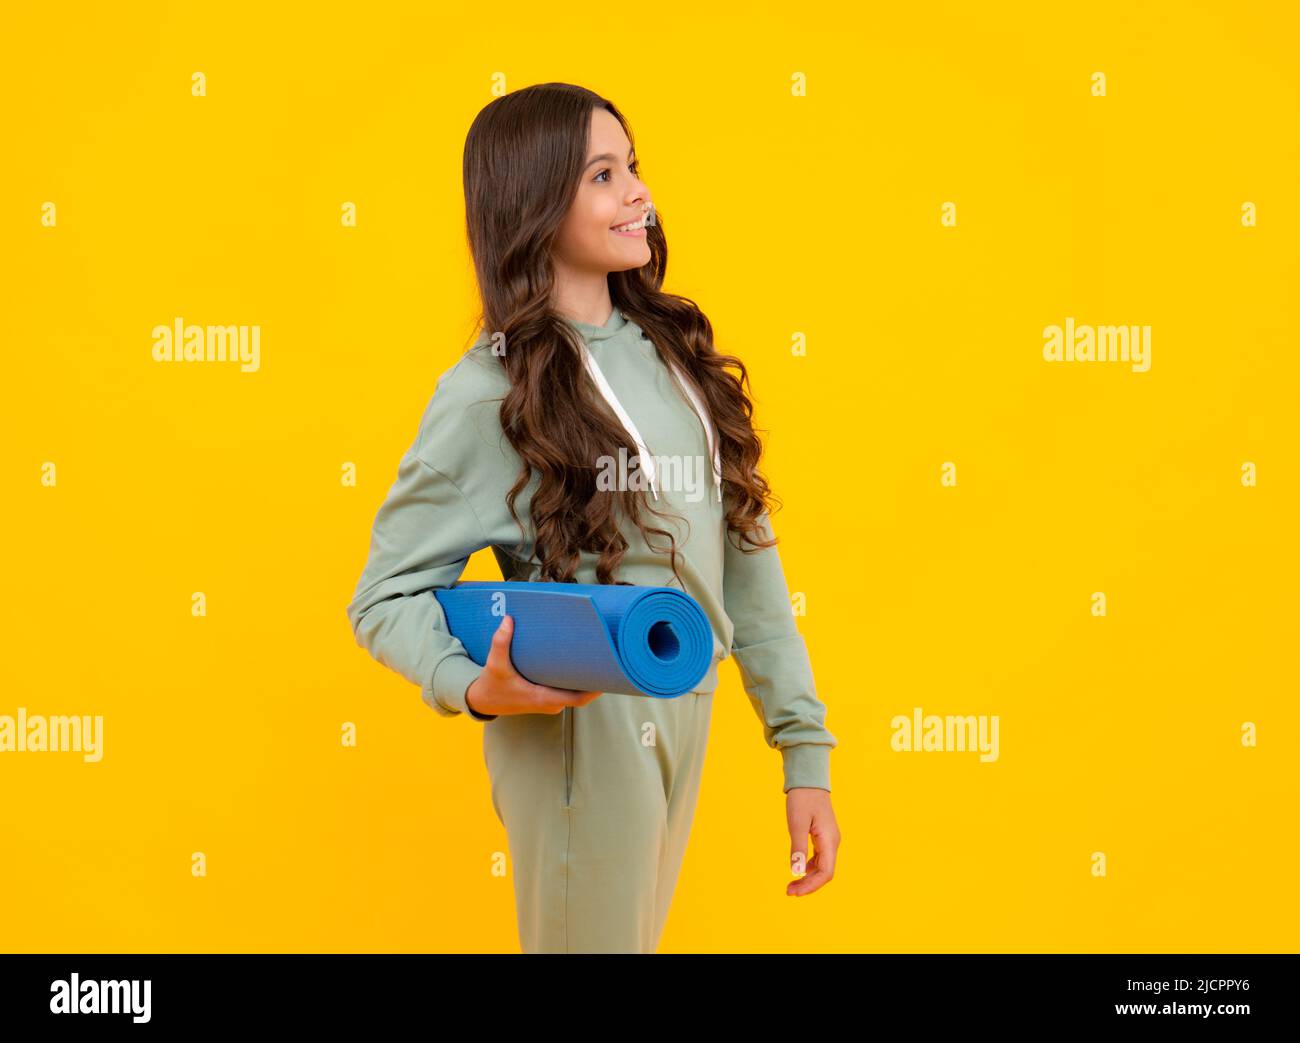 Sportswear advertising concept. Teenager child girl in tracksuits jogging suit posing in the studio hold fitness mat. Stock Photo